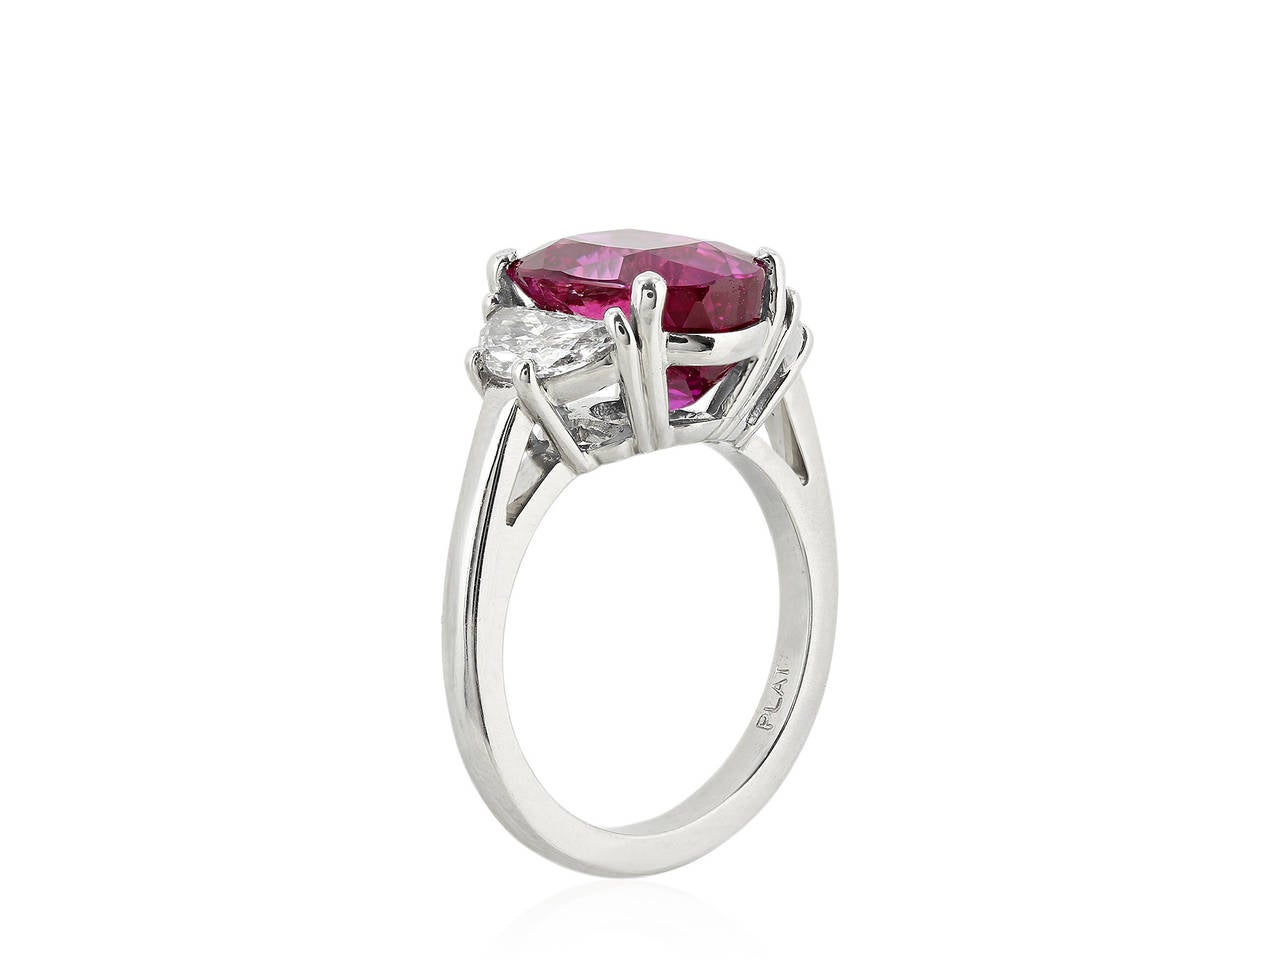 Platinum 3 stone ring consisting of 1 oval shaped purple pink sapphire weighing 6.44 carats, measuring 12.00 x 8.80 x 7.20mm with GIA certificate #1162052362 stating No Heat, the center stone is flanked by 2 brilliant cut half moons having a total